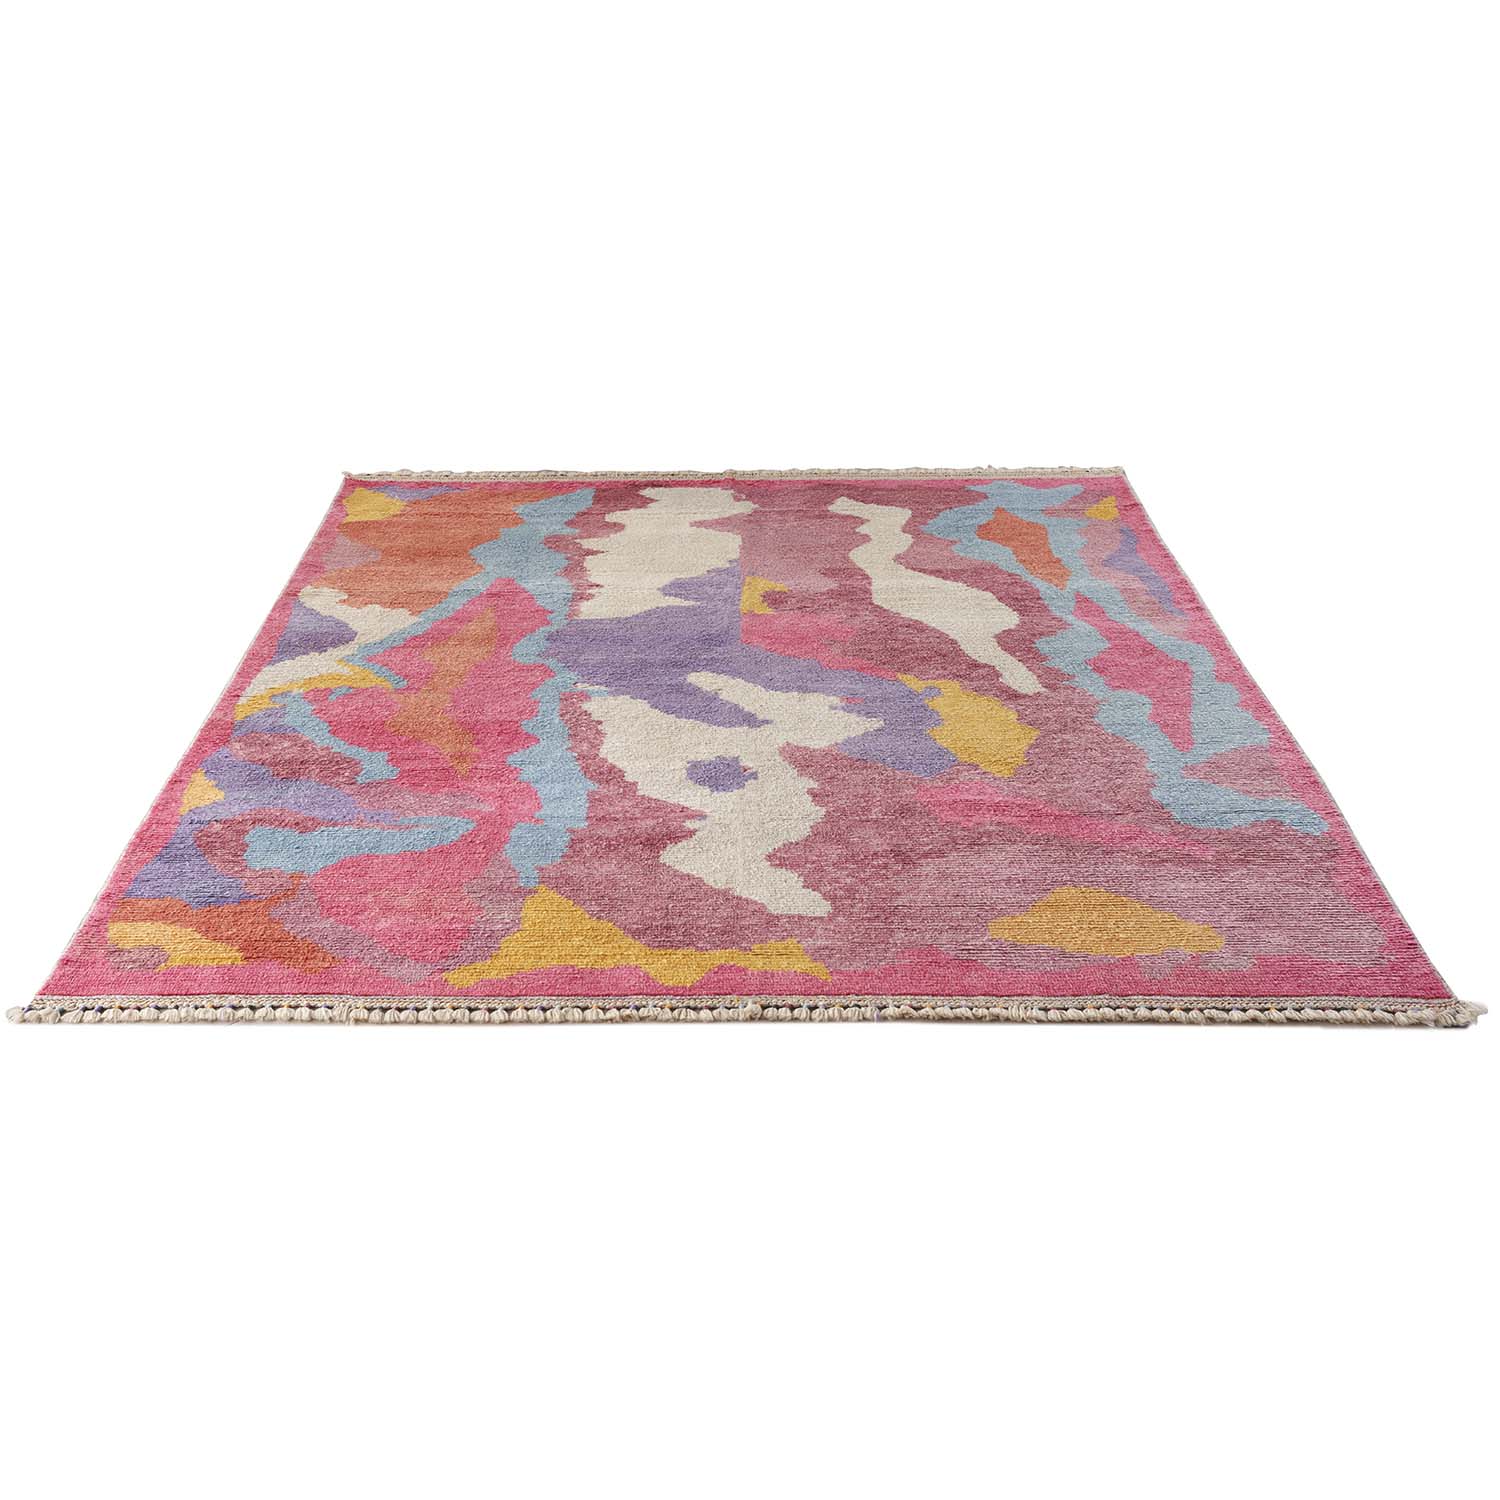 Vibrant, handcrafted area rug adds a pop of color to any space.